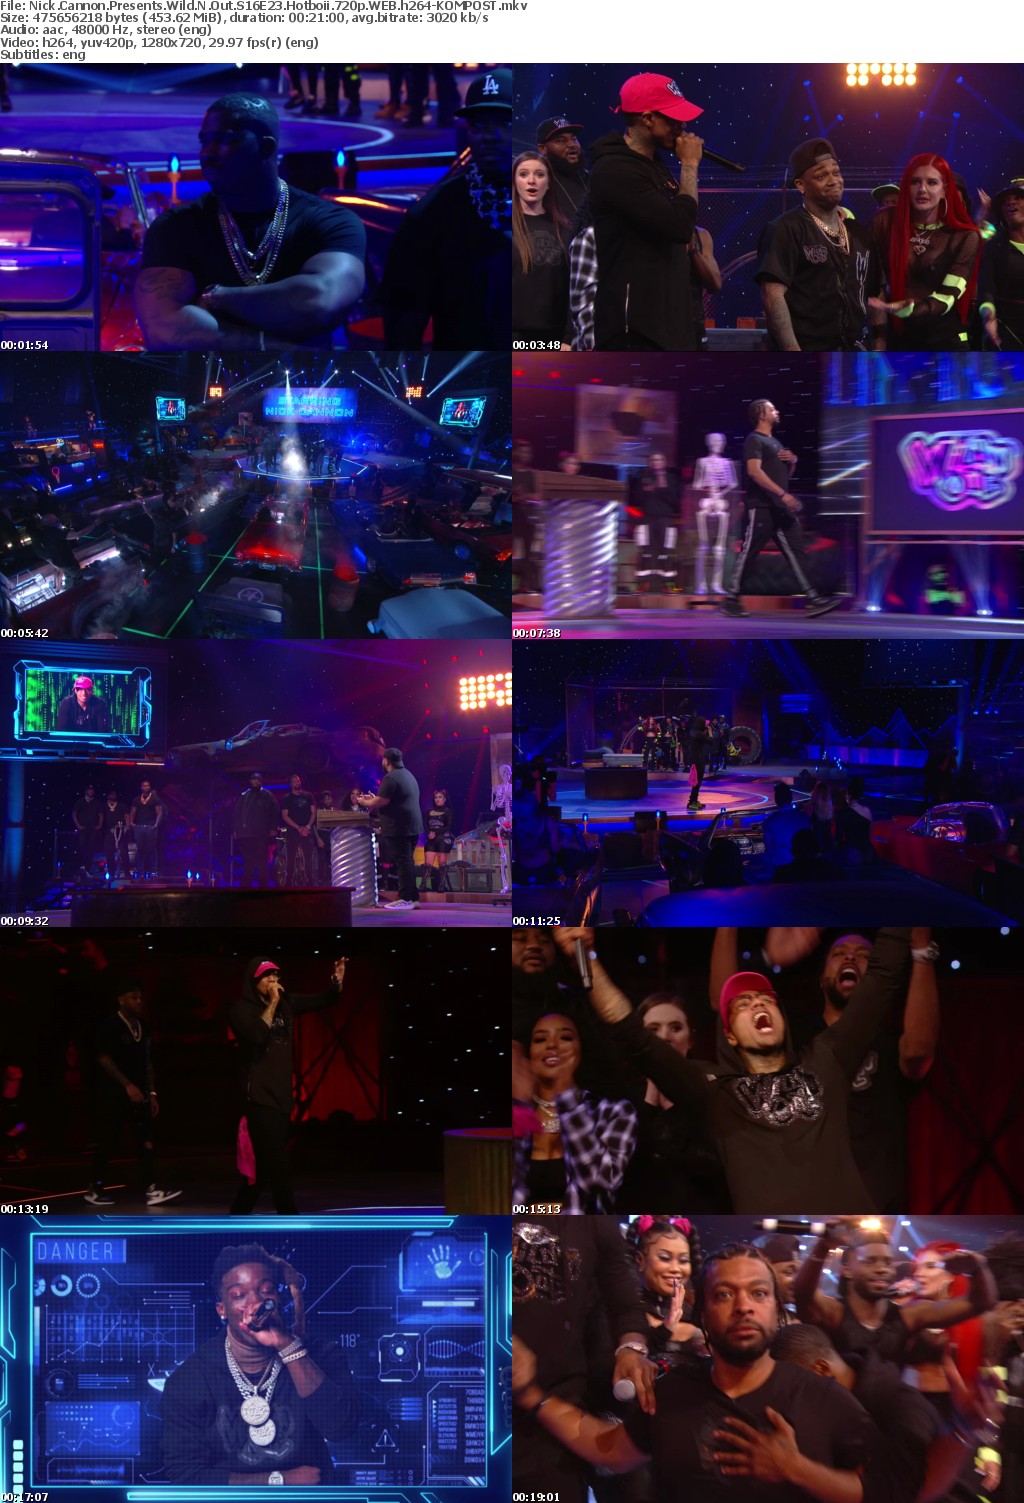 Nick Cannon Presents Wild N Out S16E23 Hotboii 720p WEB h264-KOMPOST